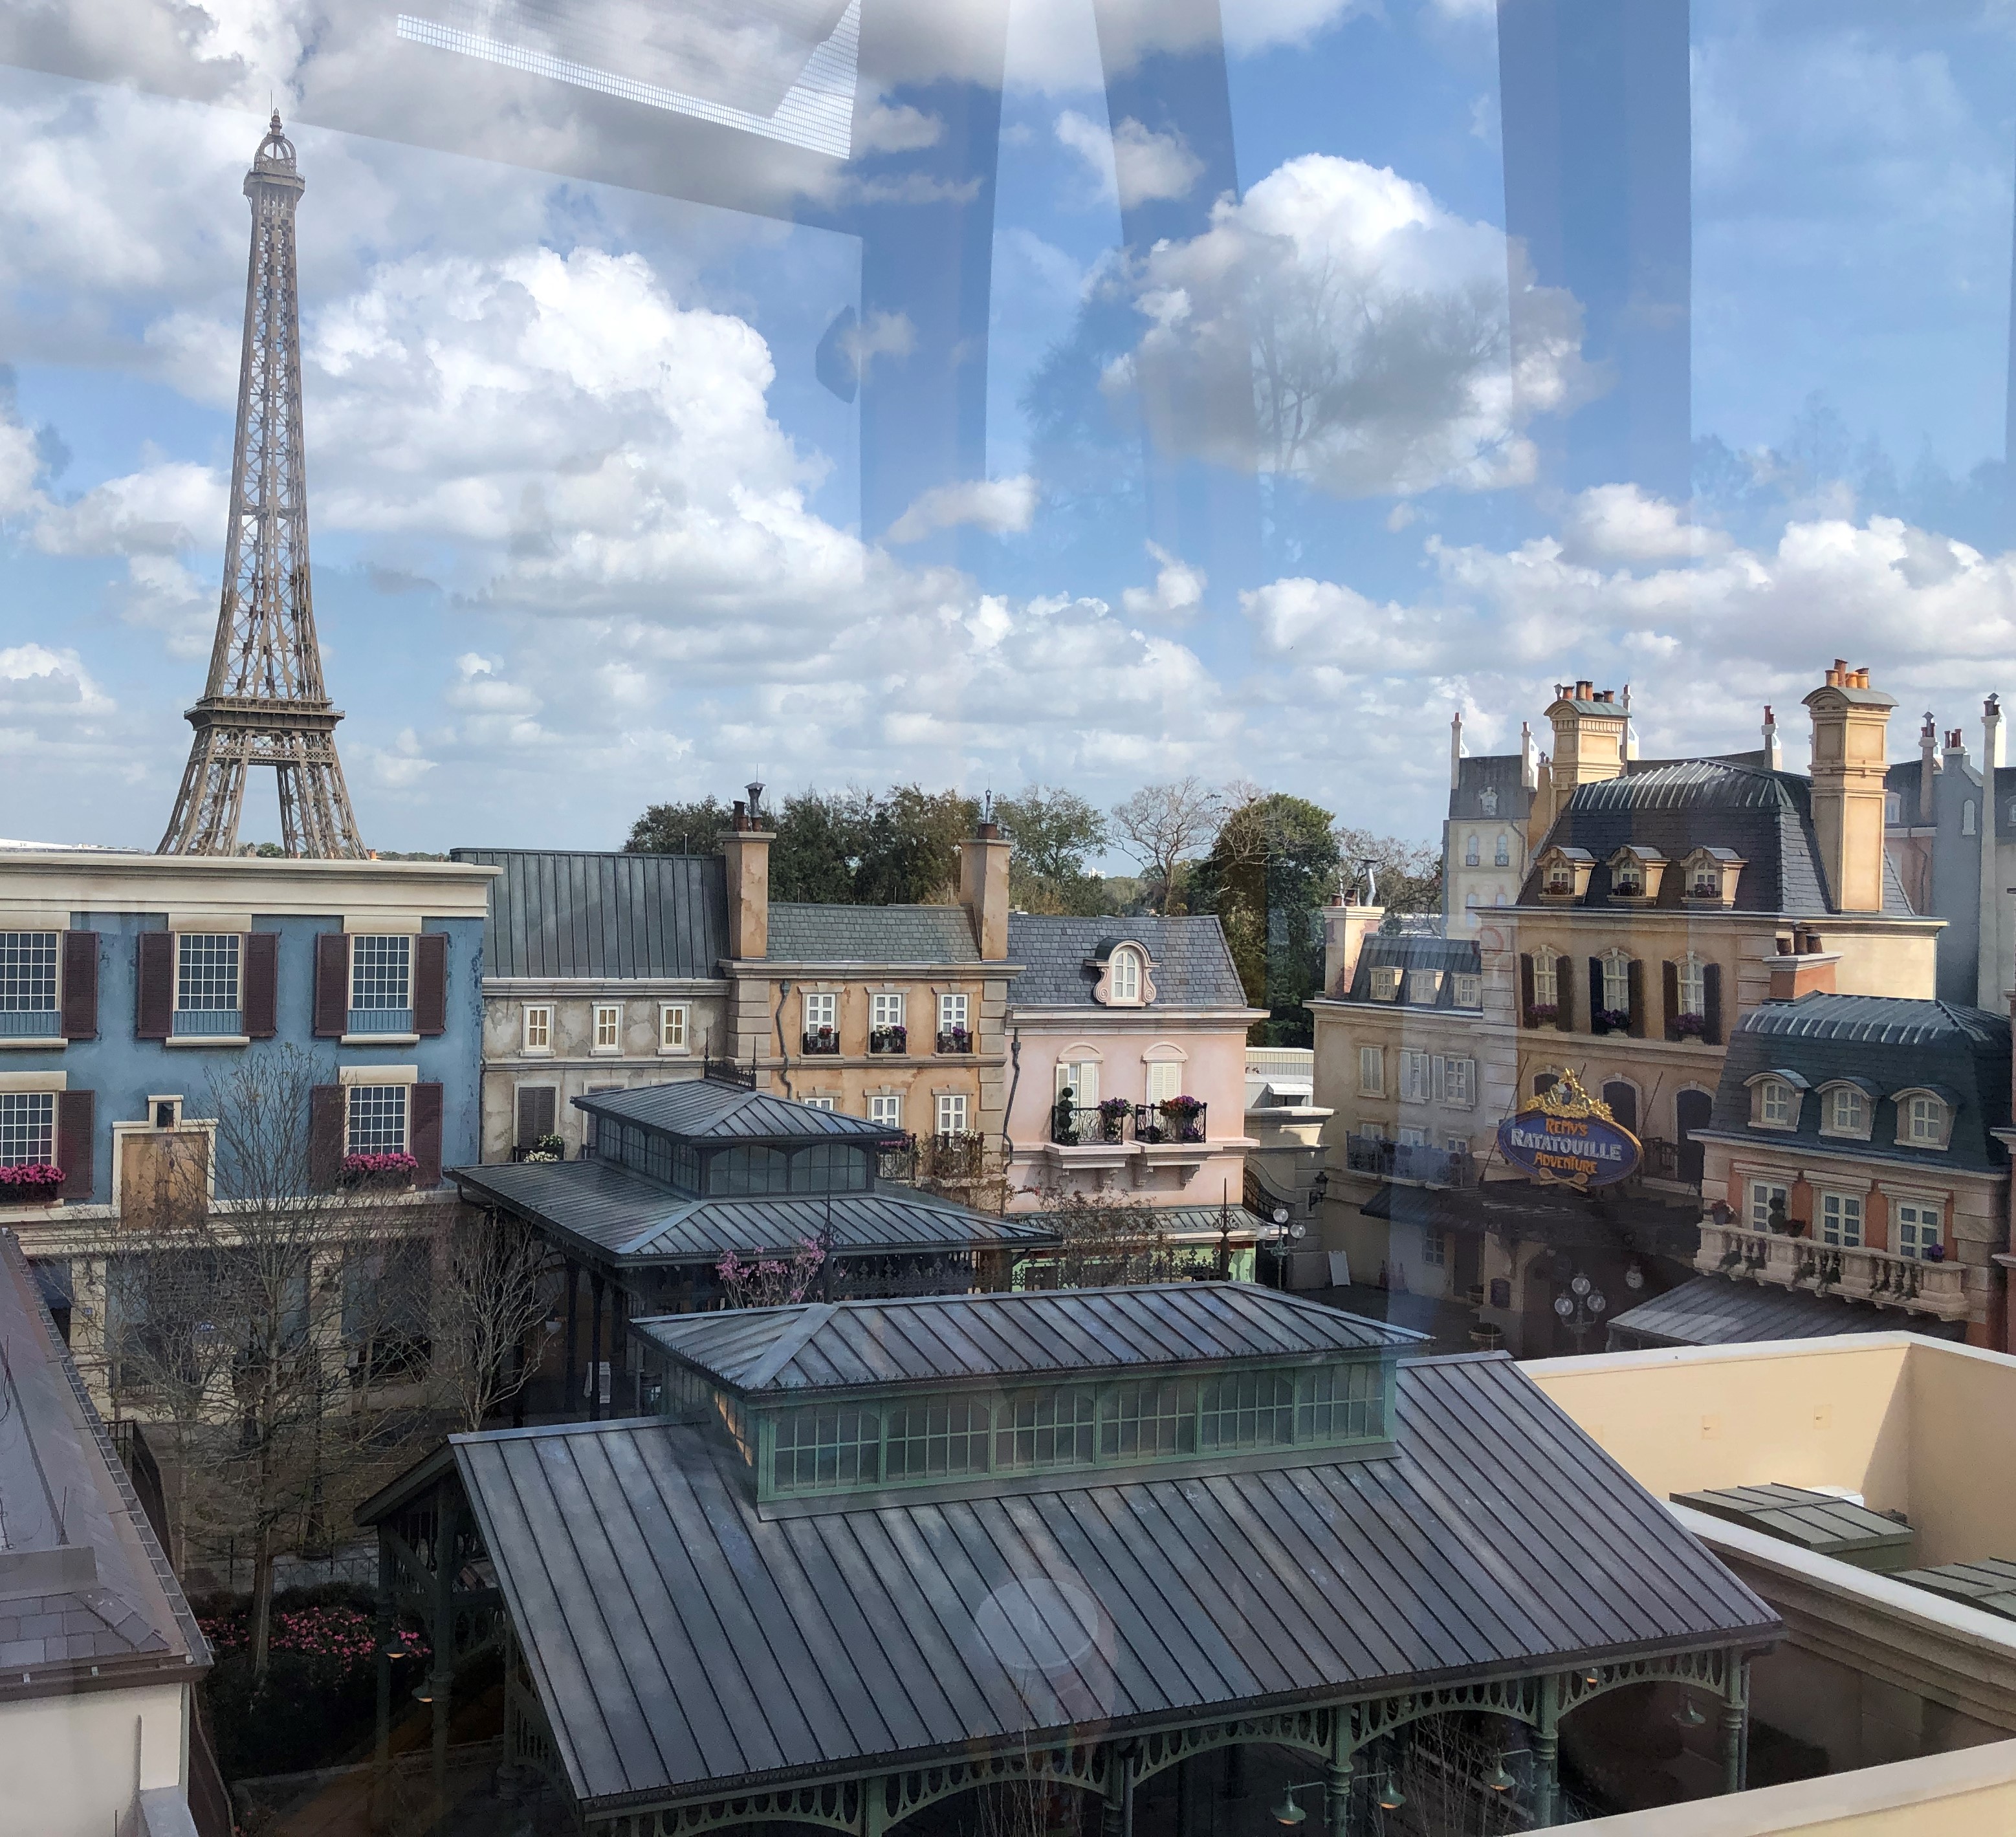 a view of France in Epcot from a the window of a Skyliner gondola